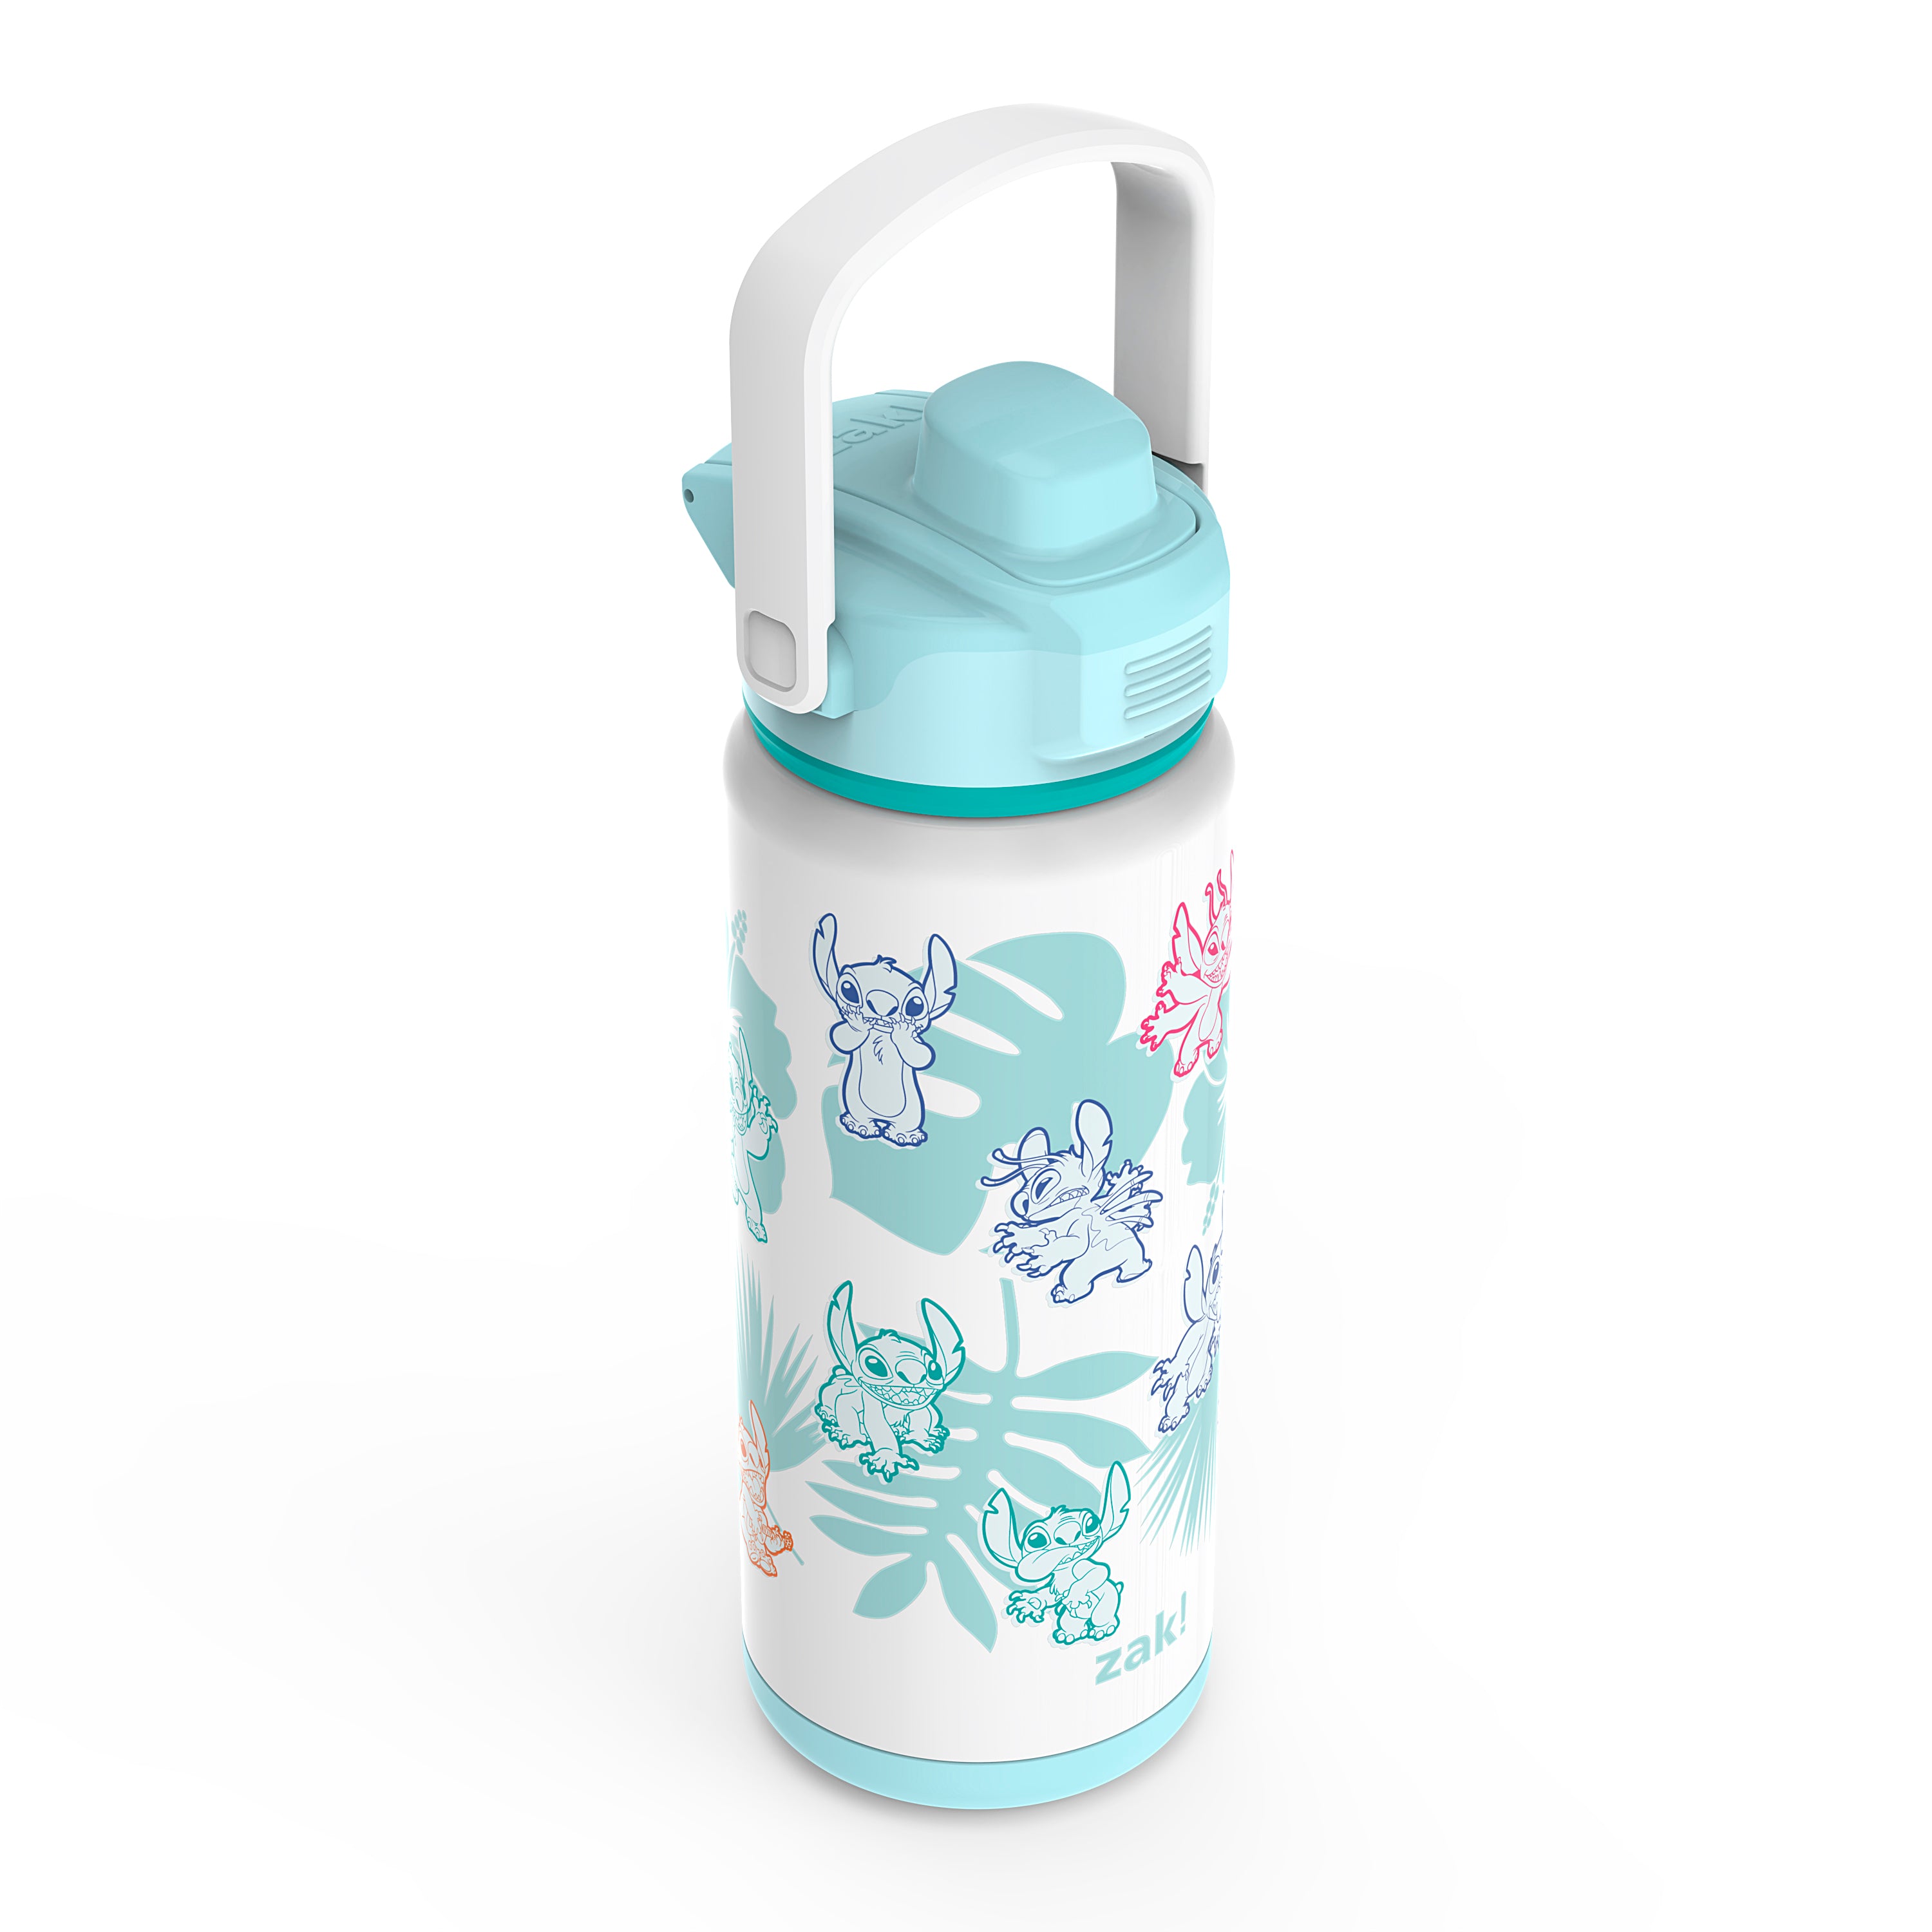 Disney Lilo &amp; Stitch Beacon Stainless Steel Insulated Kids Water Bottle with Covered Spout, 20 Ounces